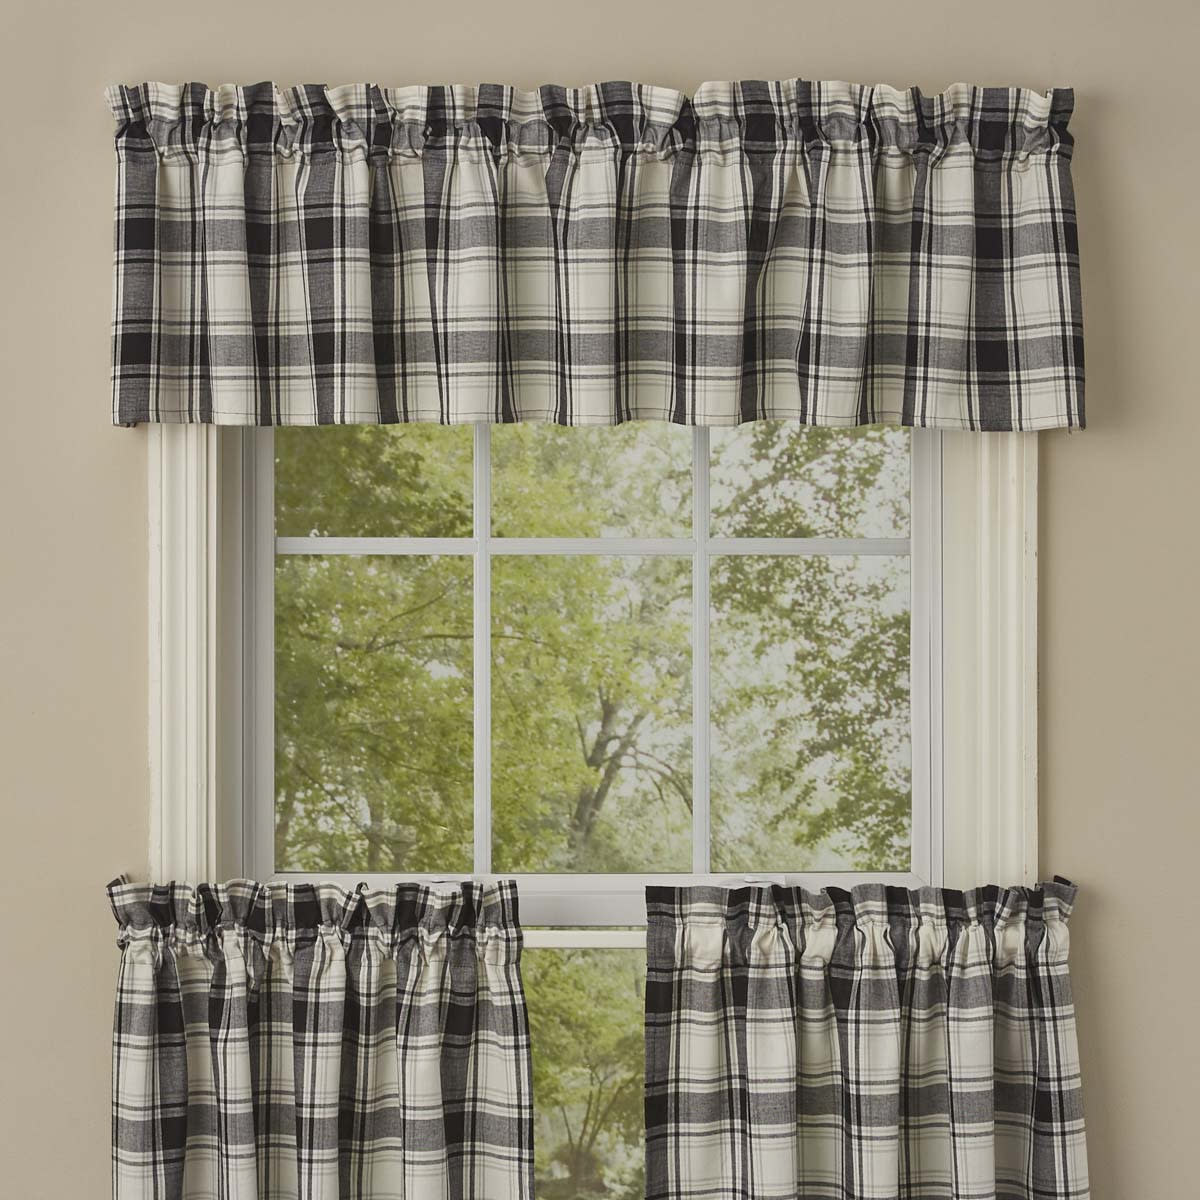 1 Wicklow Red Black Check Country Lined Layered Valance 72" x 16" 